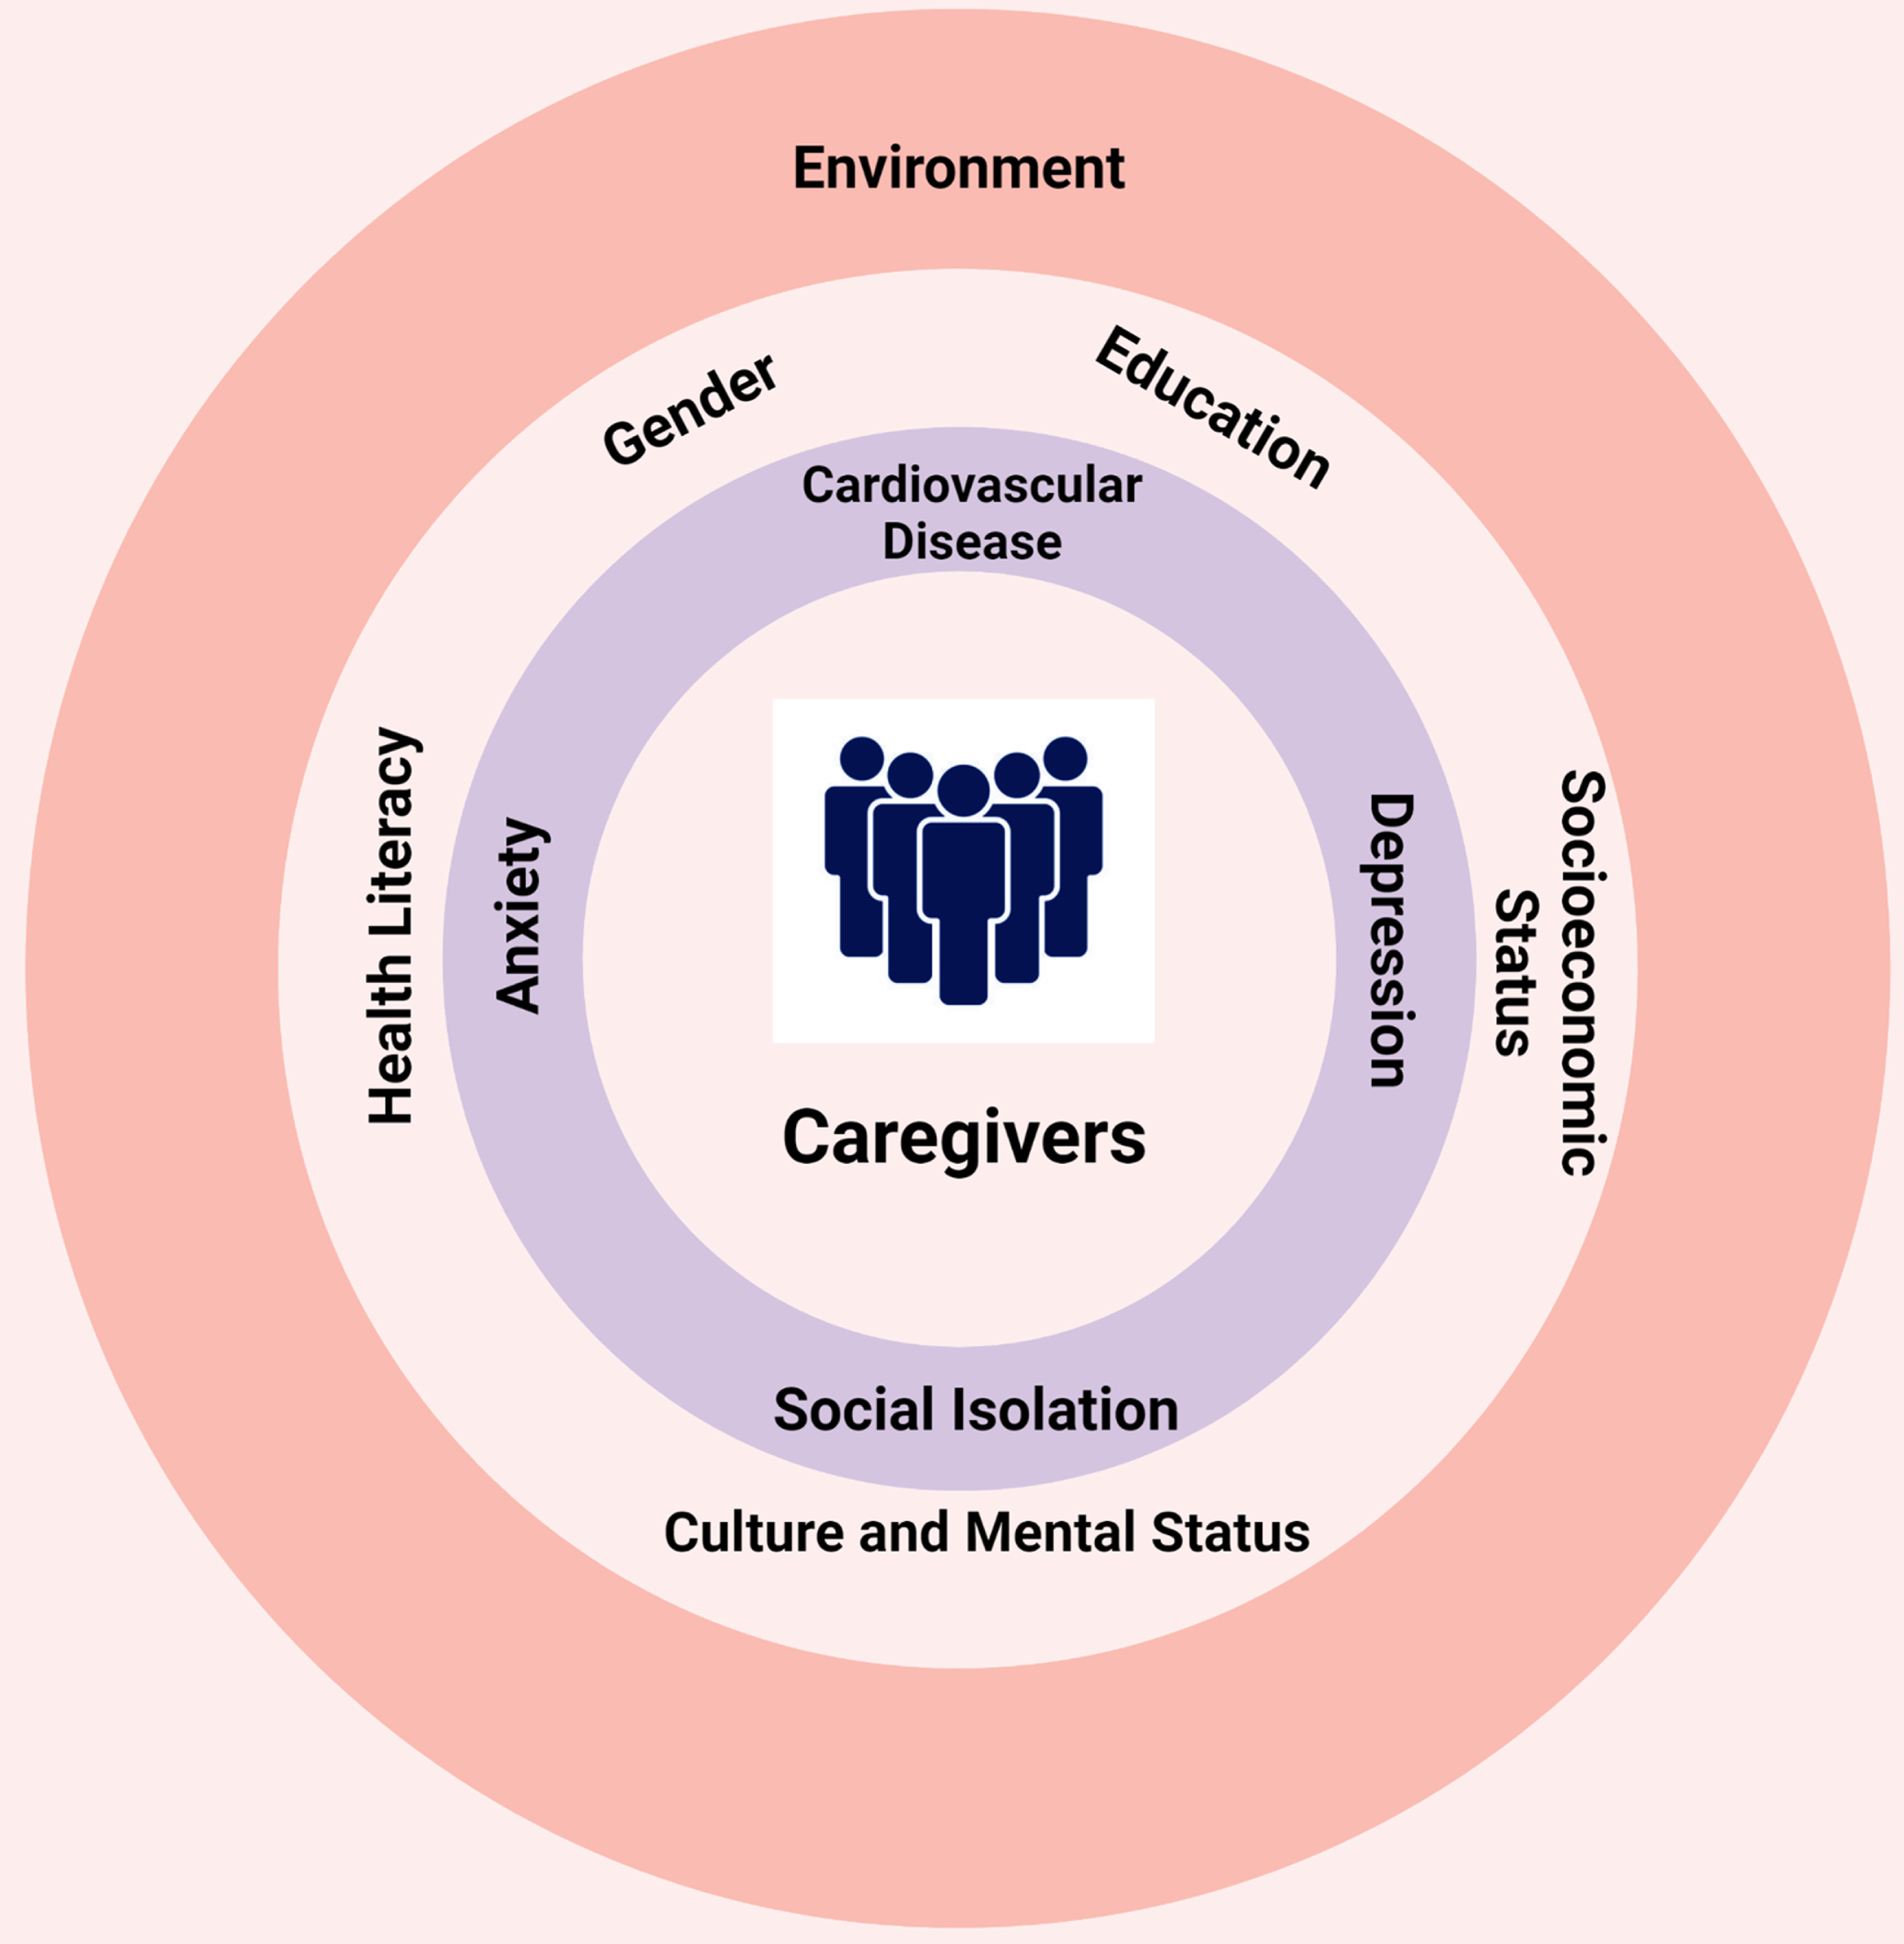 Influence of different factors on caregiving. Many environmental, cultural, and socioeconomic factors influence the overall well-being of family caregivers.